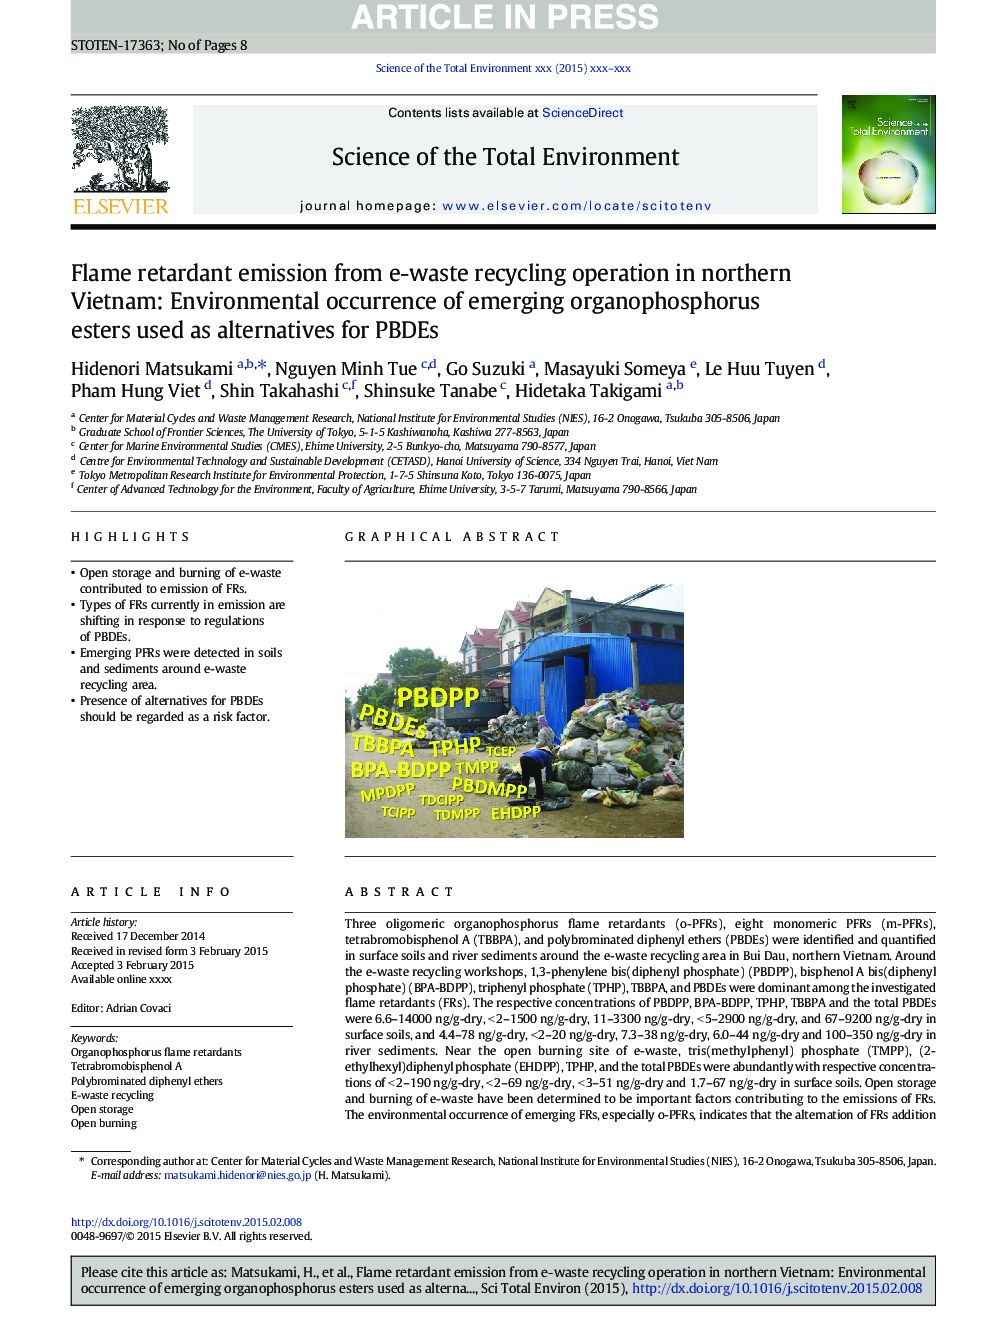 Flame retardant emission from e-waste recycling operation in northern Vietnam: Environmental occurrence of emerging organophosphorus esters used as alternatives for PBDEs